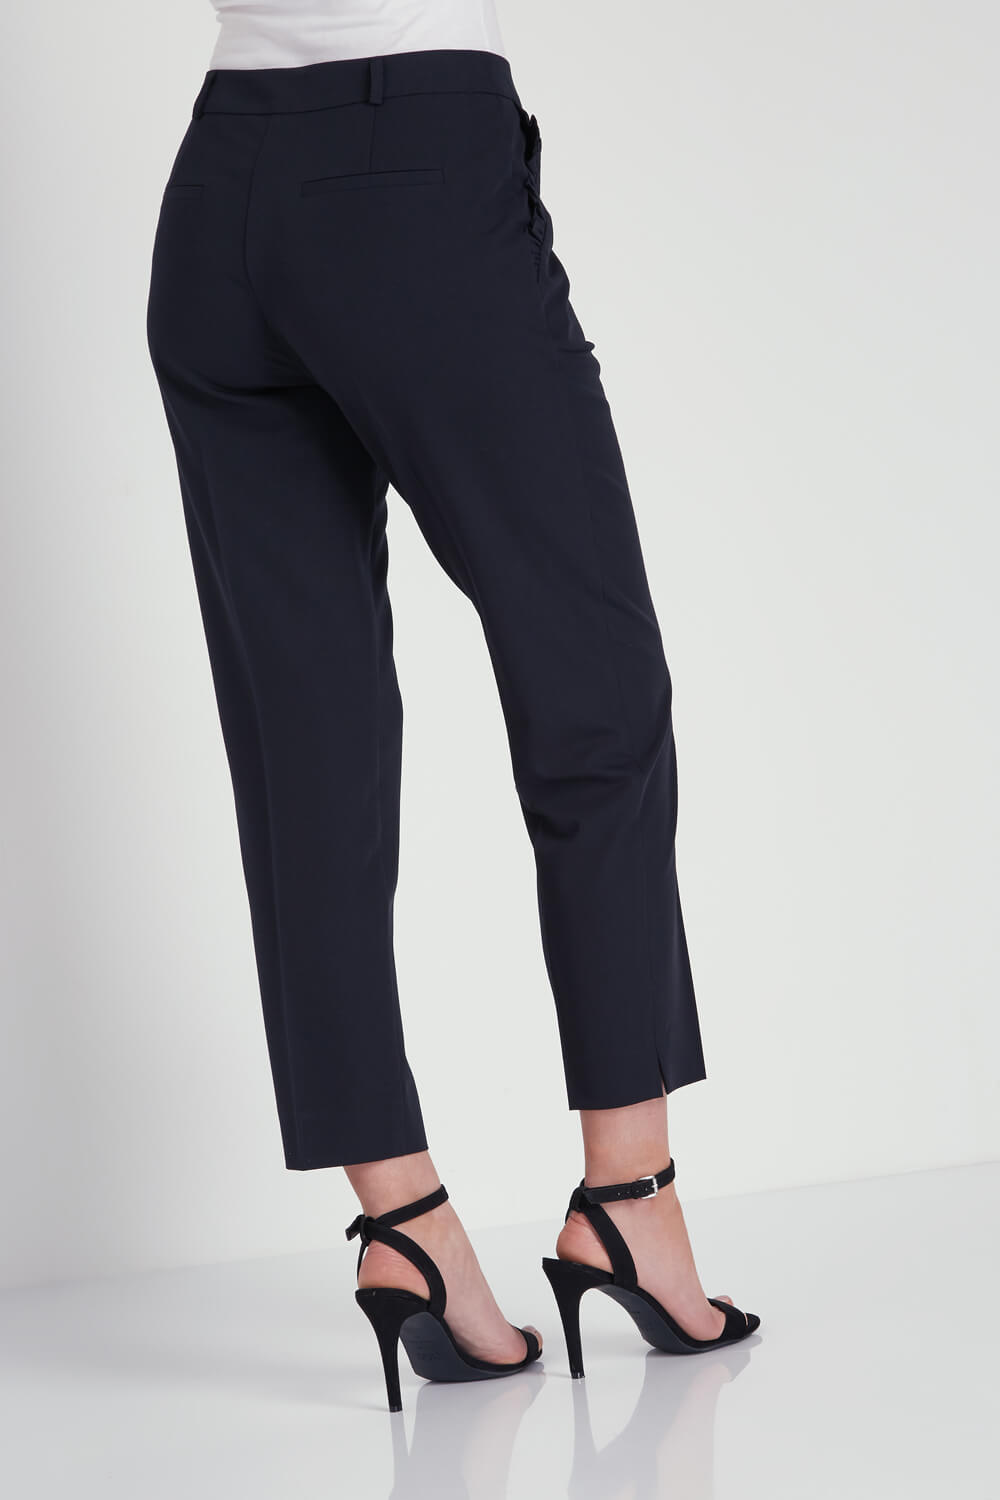 Black Tapered Frill Detail Trousers, Image 2 of 5